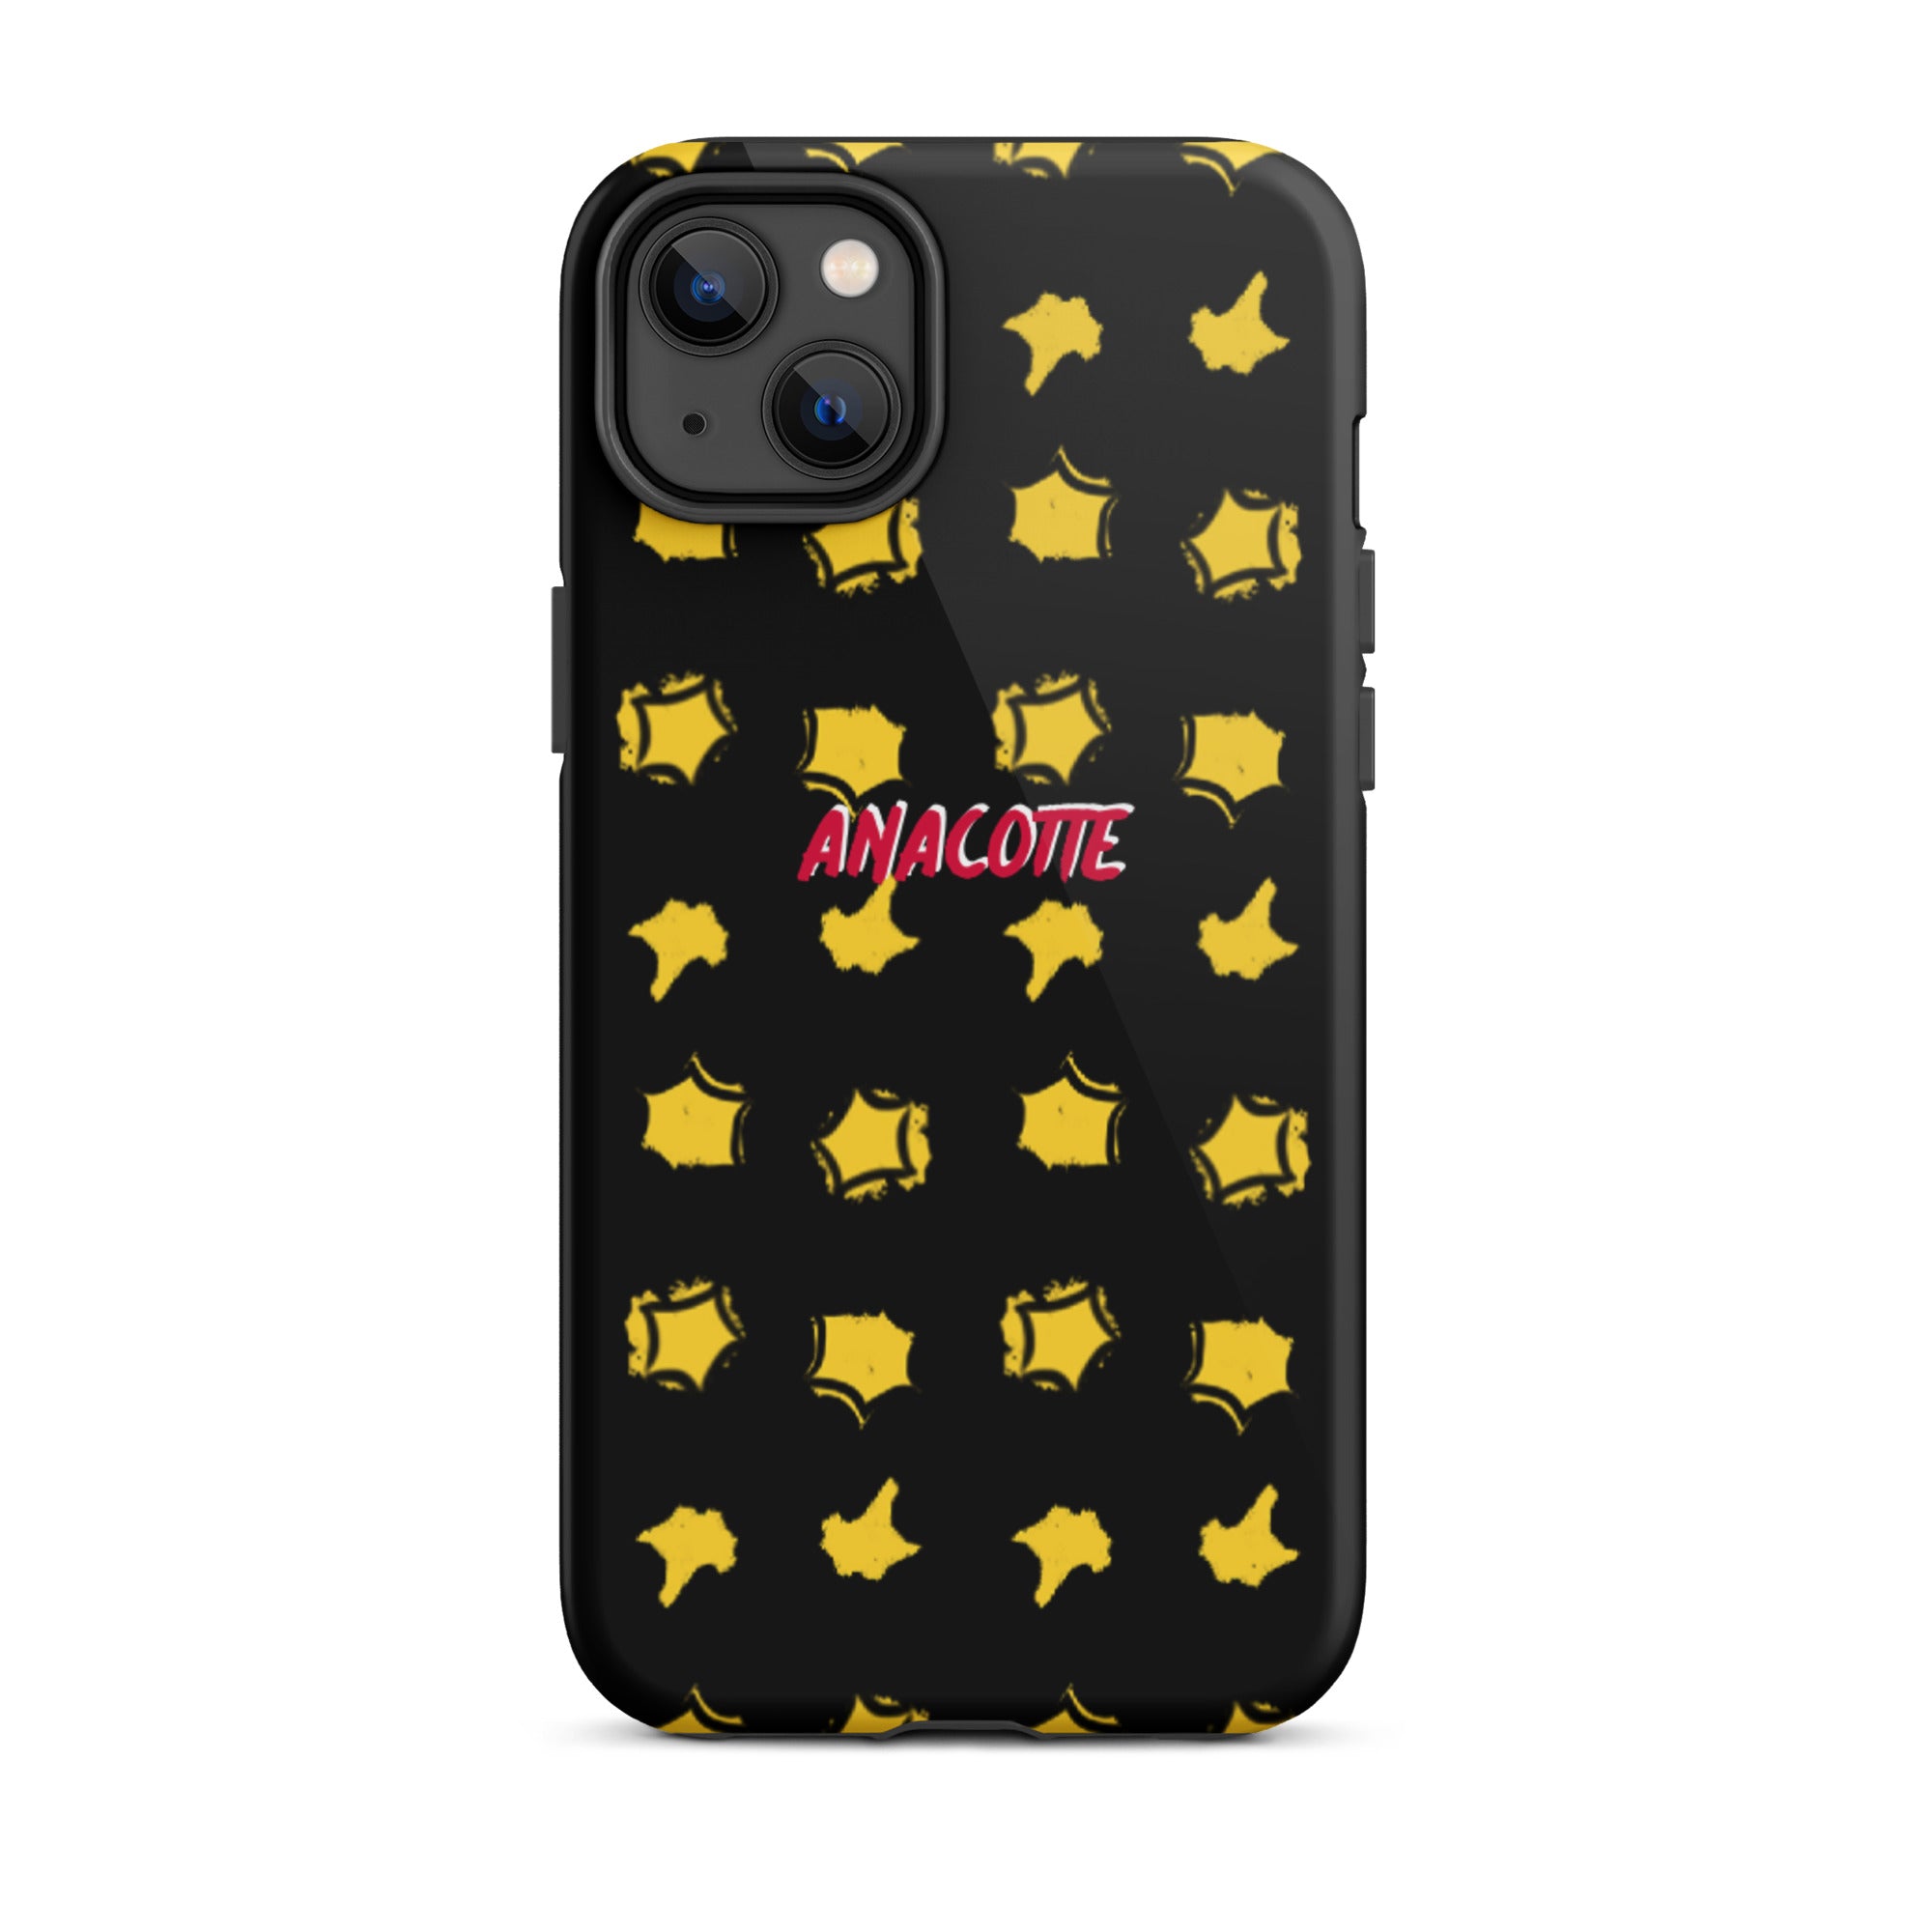 iPhone 14, 13, 12, 11 Christmas Theme iPhone Cases Star Black Anacotte